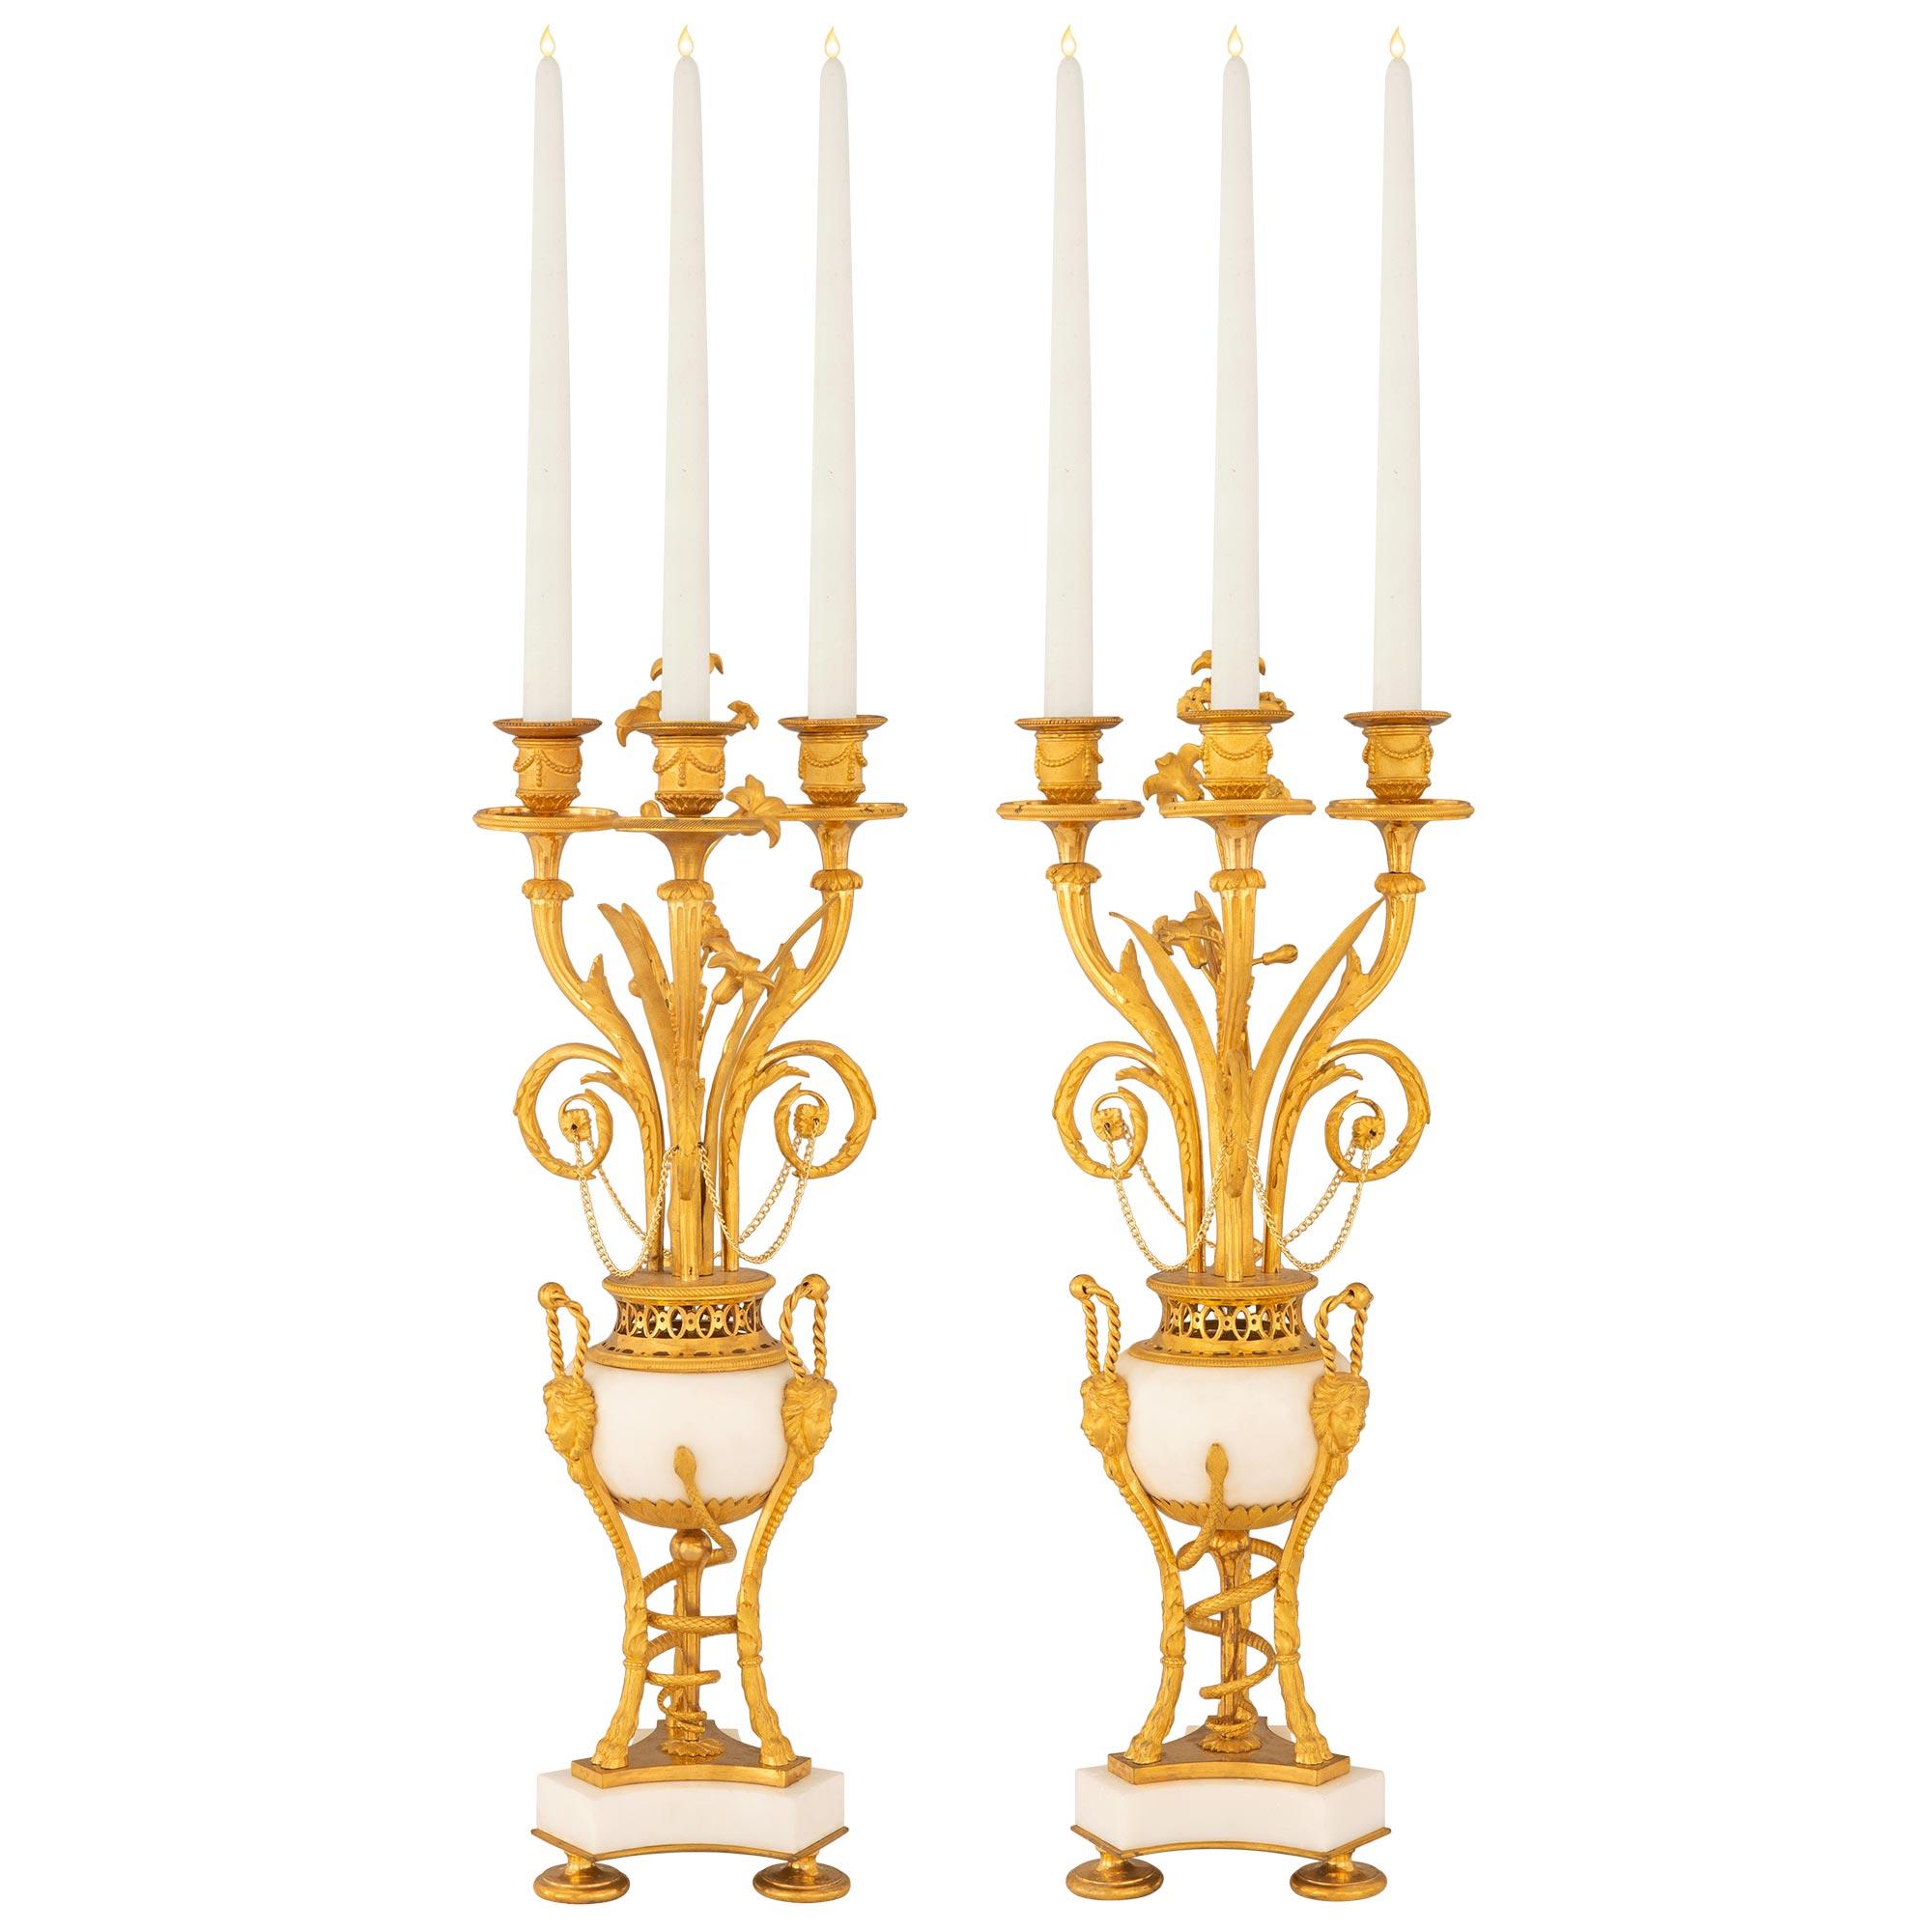 Pair of French 19th Century Louis XVI St. Marble and Ormolu Candelabras In Good Condition For Sale In West Palm Beach, FL